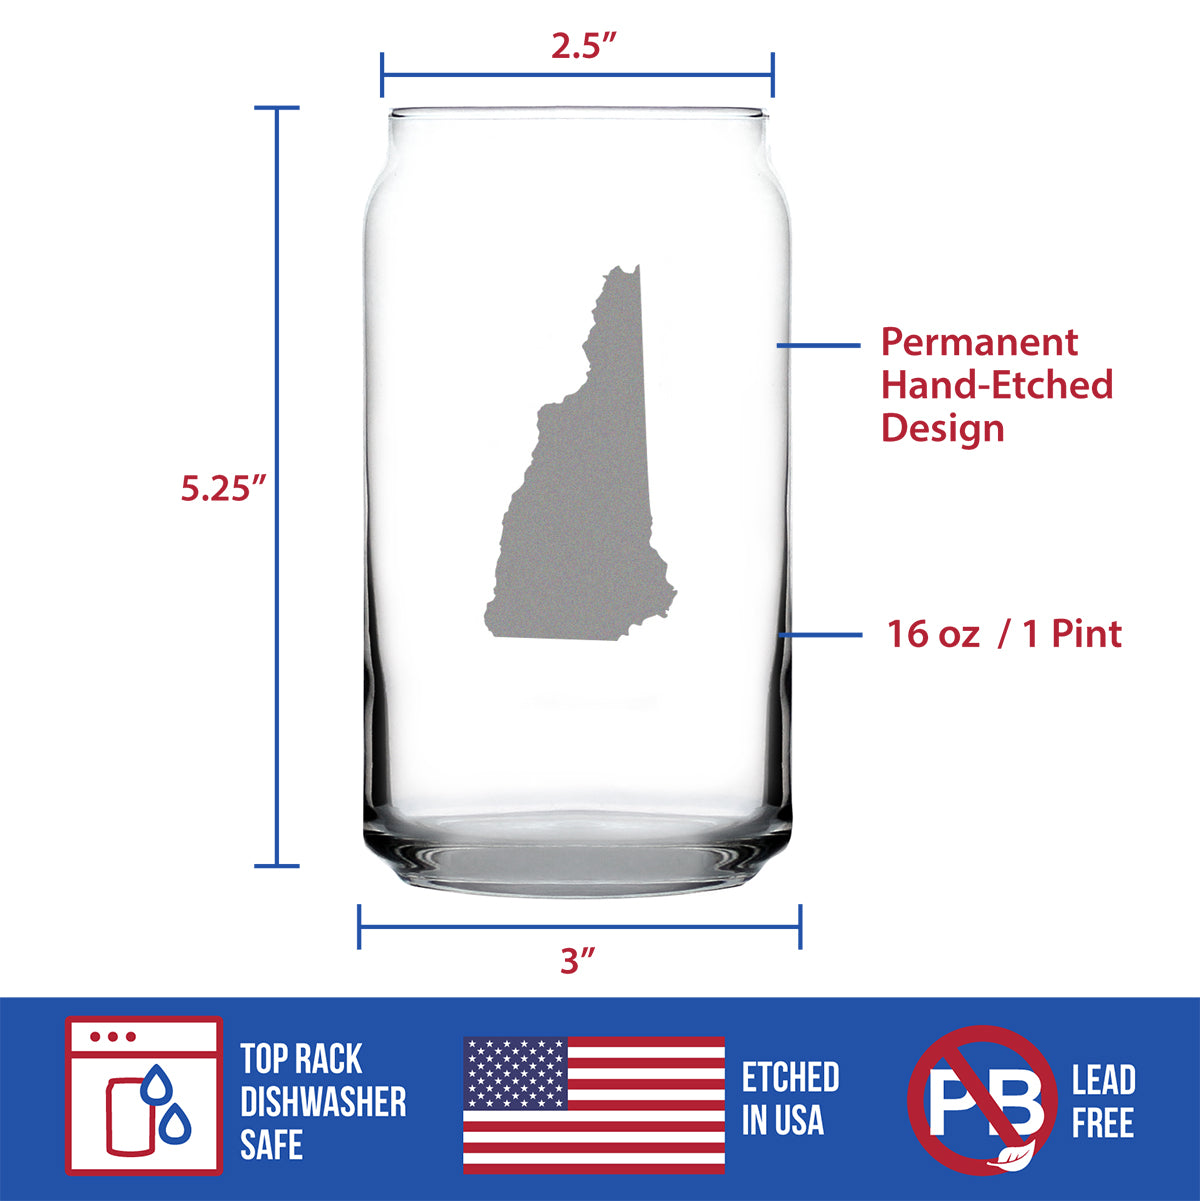 New Hampshire State Outline Beer Can Pint Glass - State Themed Drinking Decor and Gifts for New Hampshirite Women &amp; Men - 16 Oz Glasses